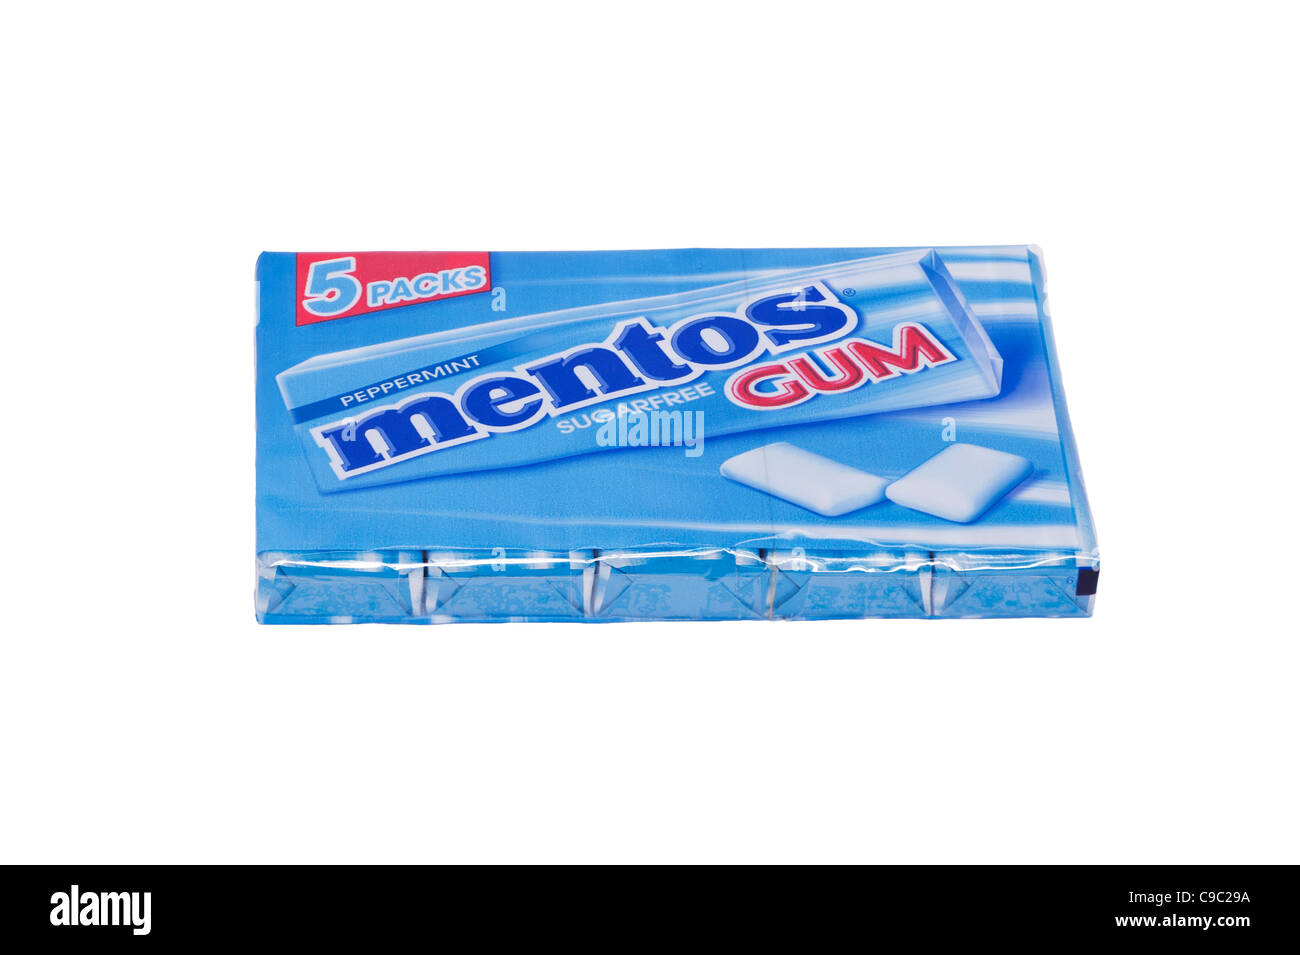 A multipack of Mentos peppermint sugarfree chewing gum on a white background Stock Photo